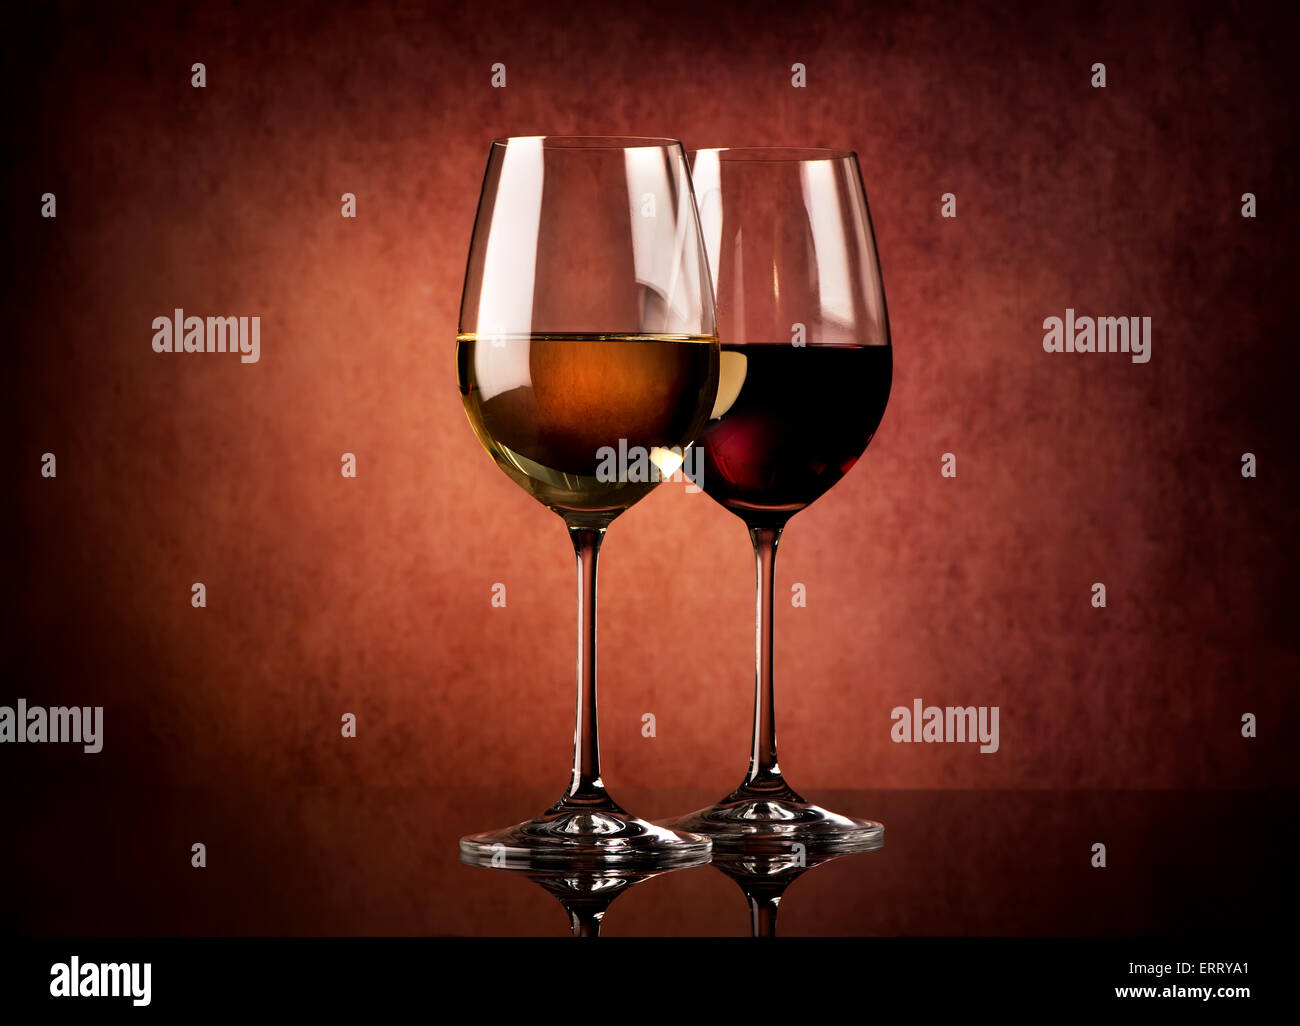 Two glasses of wine on a textured background Stock Photo